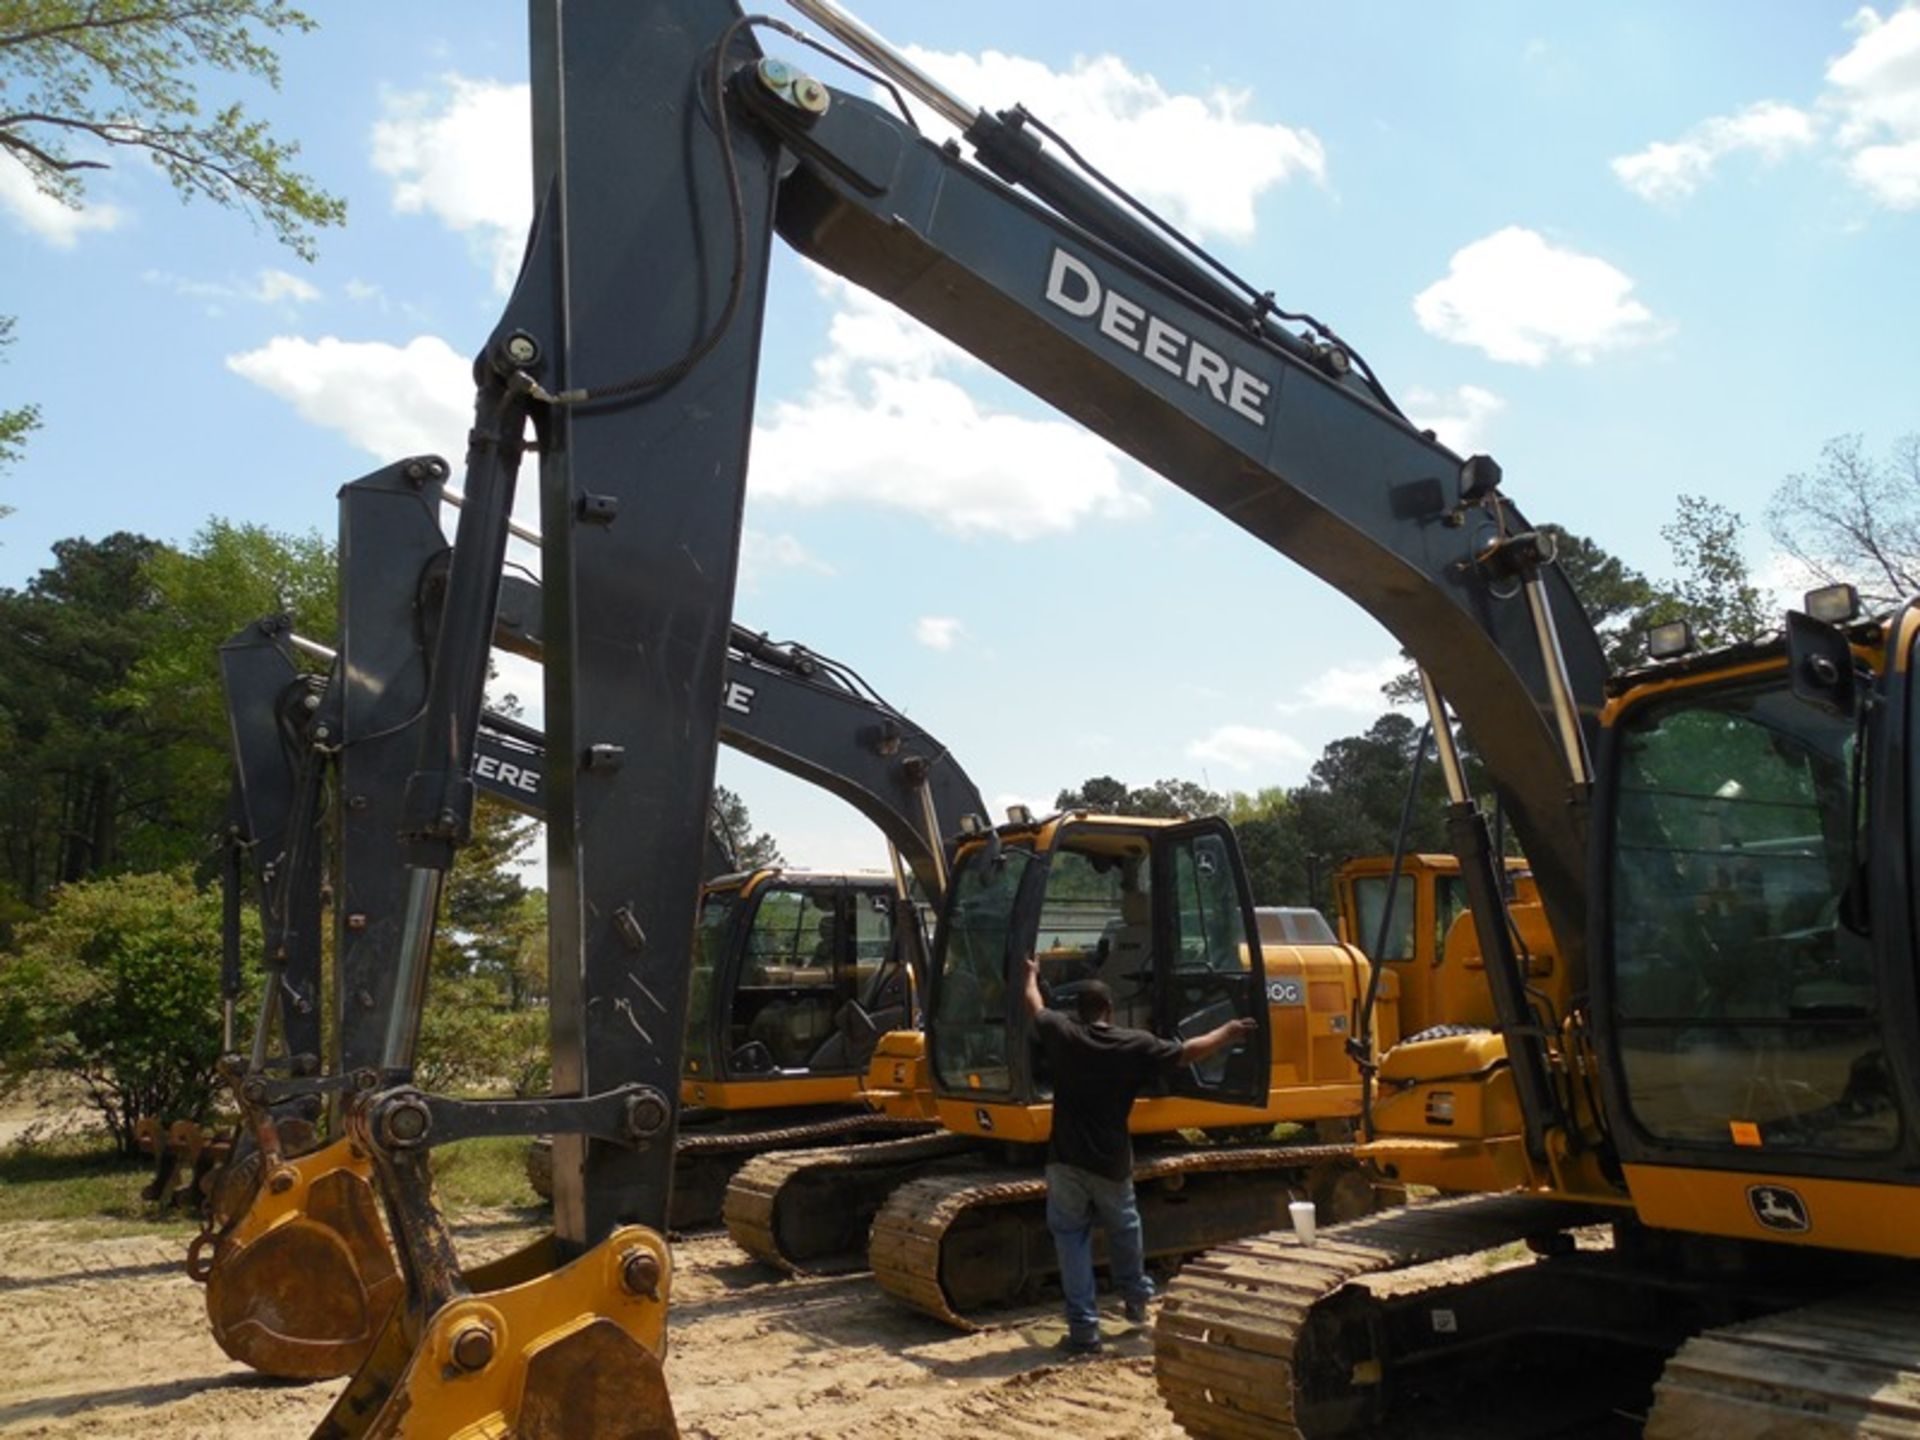 2014 Deere 130G Excavator 3113 hrs Cab / AC, Long Arm, 28" Pads, 24" bucket, Control Pattern - Image 2 of 9